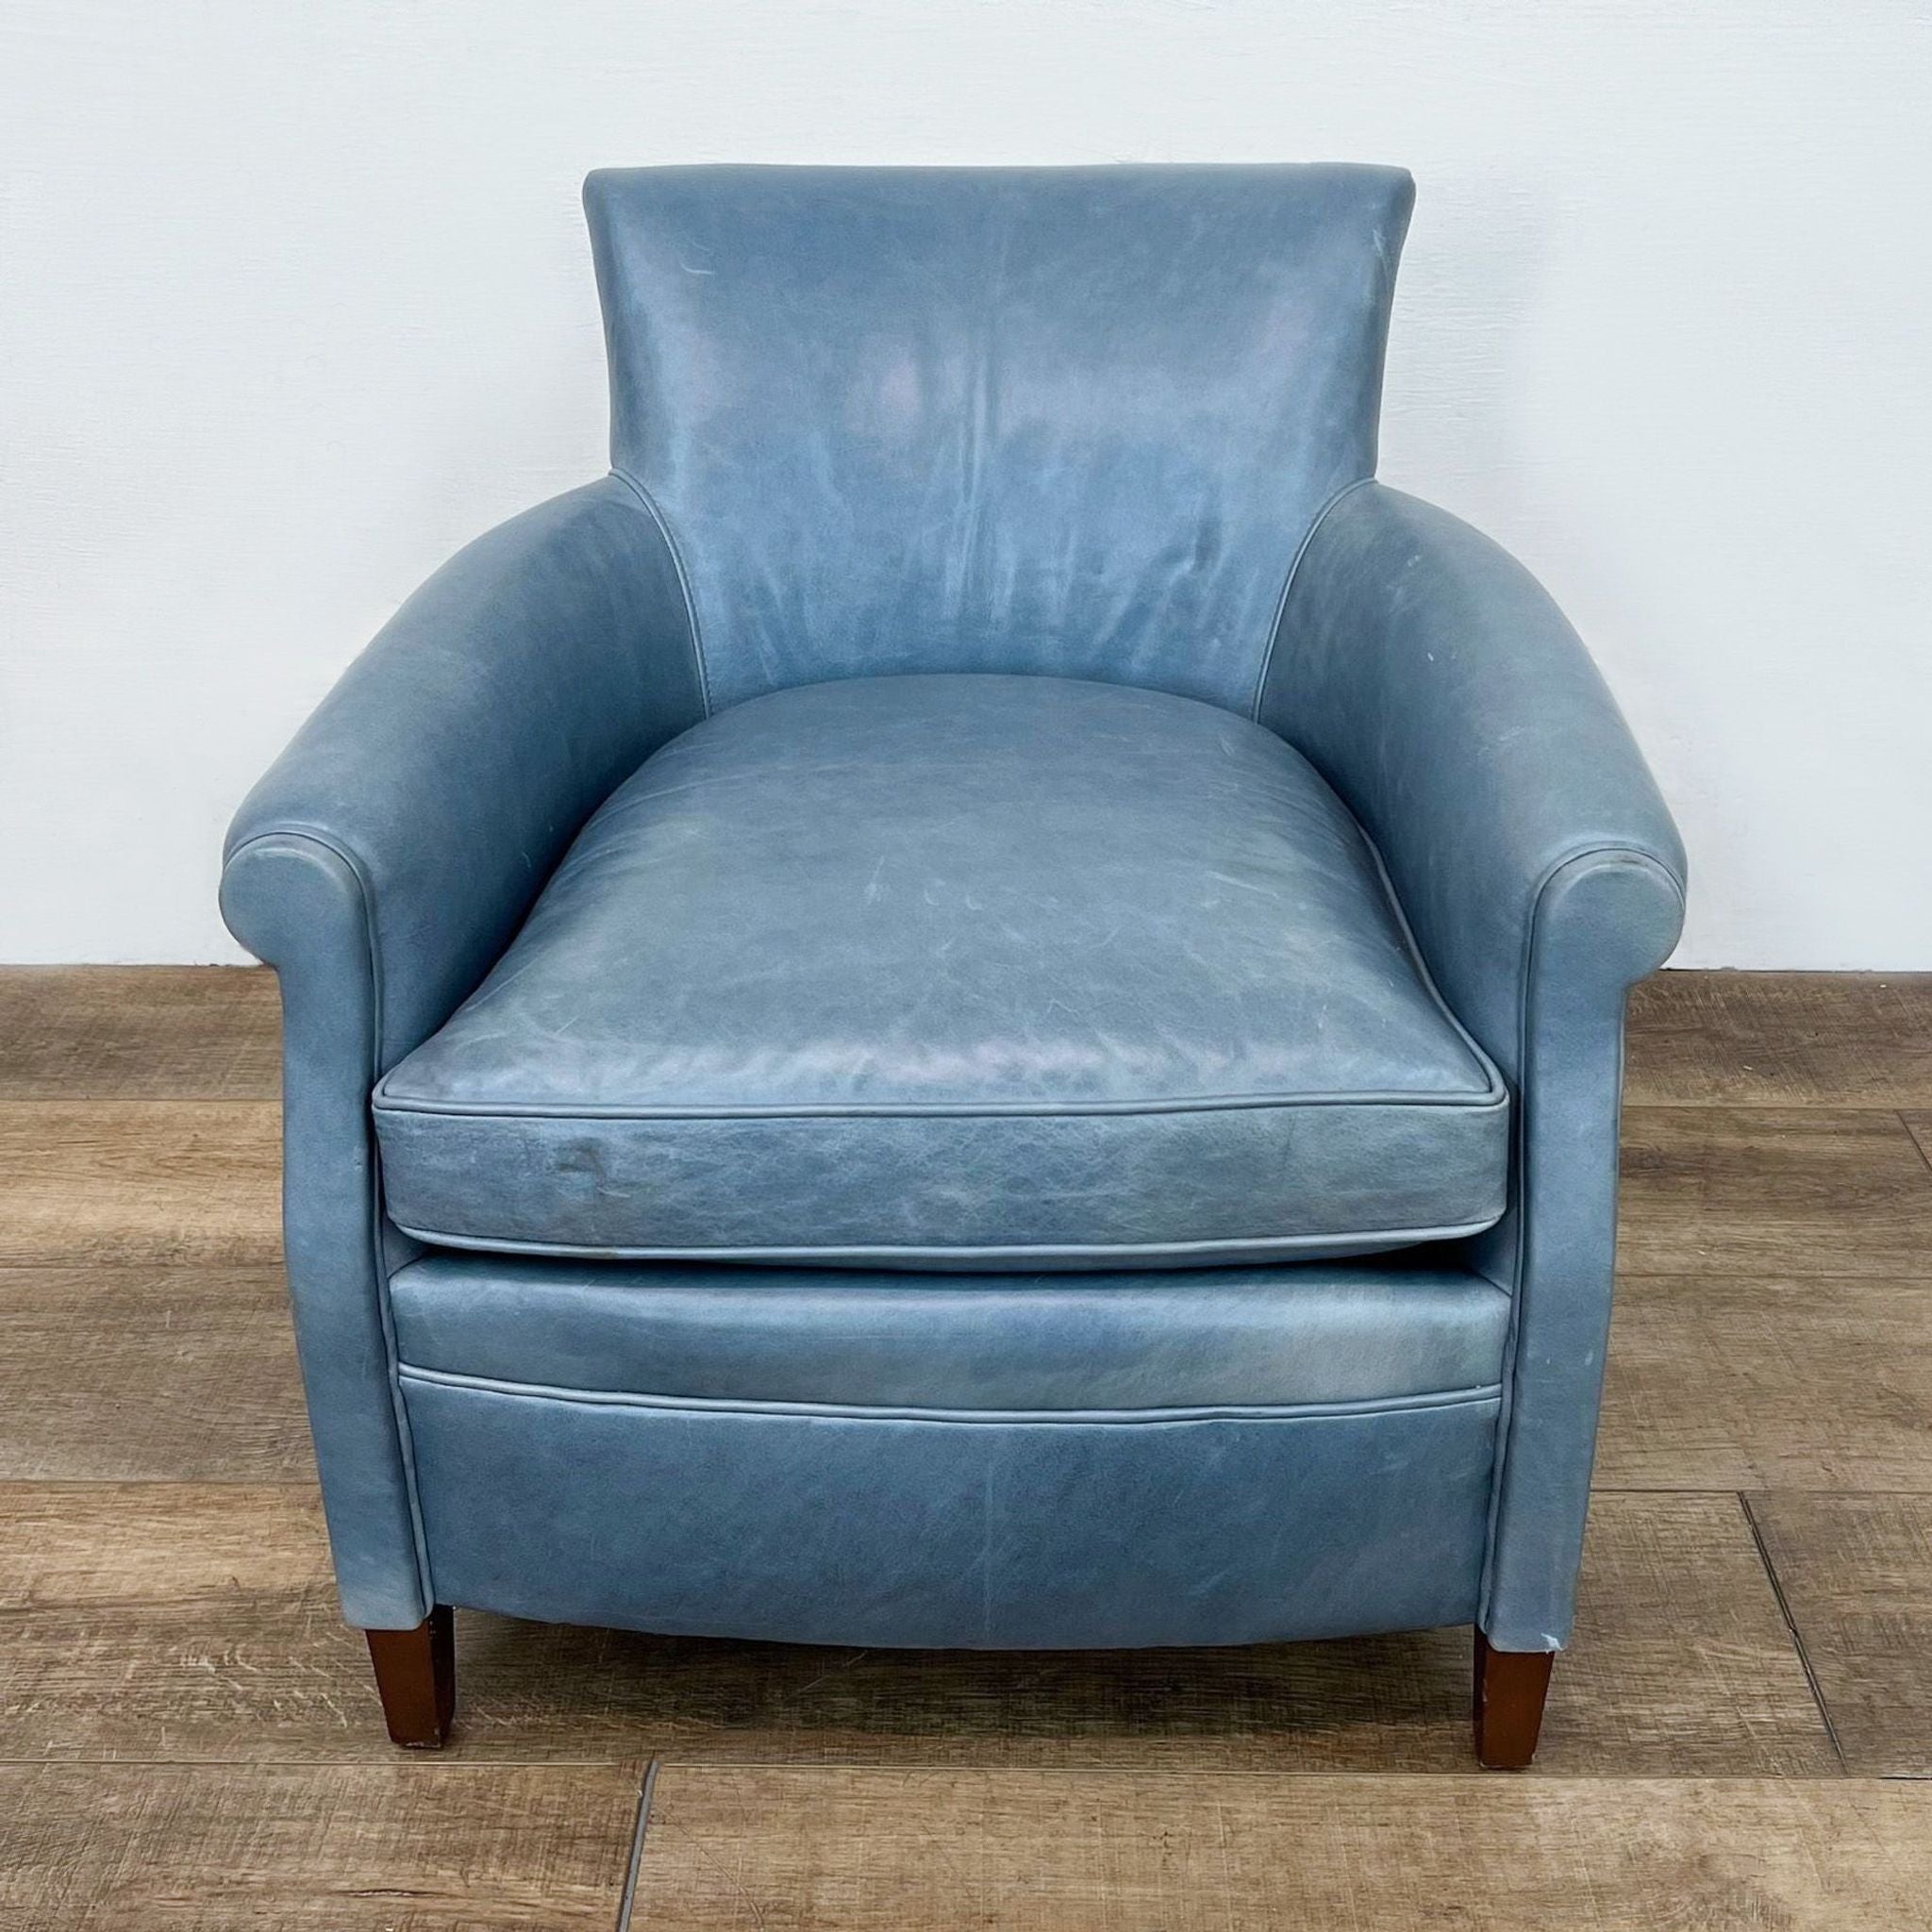 Moore and Giles 33 Original blue leather lounge chair with a solid wood frame and cushioned seat, viewed from the front.